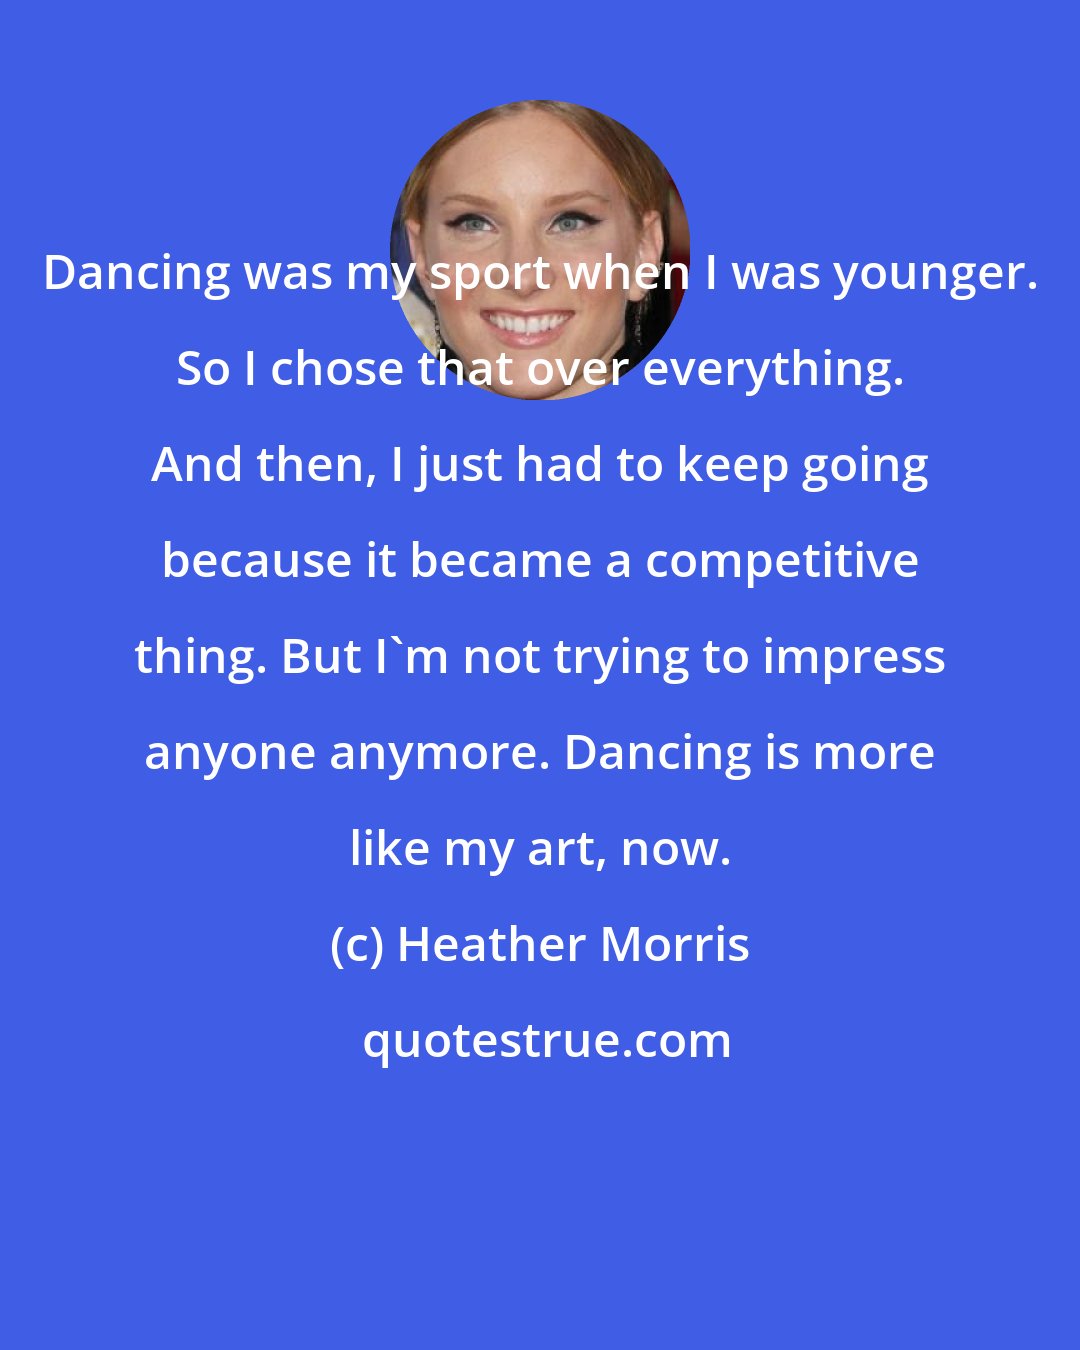 Heather Morris: Dancing was my sport when I was younger. So I chose that over everything. And then, I just had to keep going because it became a competitive thing. But I'm not trying to impress anyone anymore. Dancing is more like my art, now.